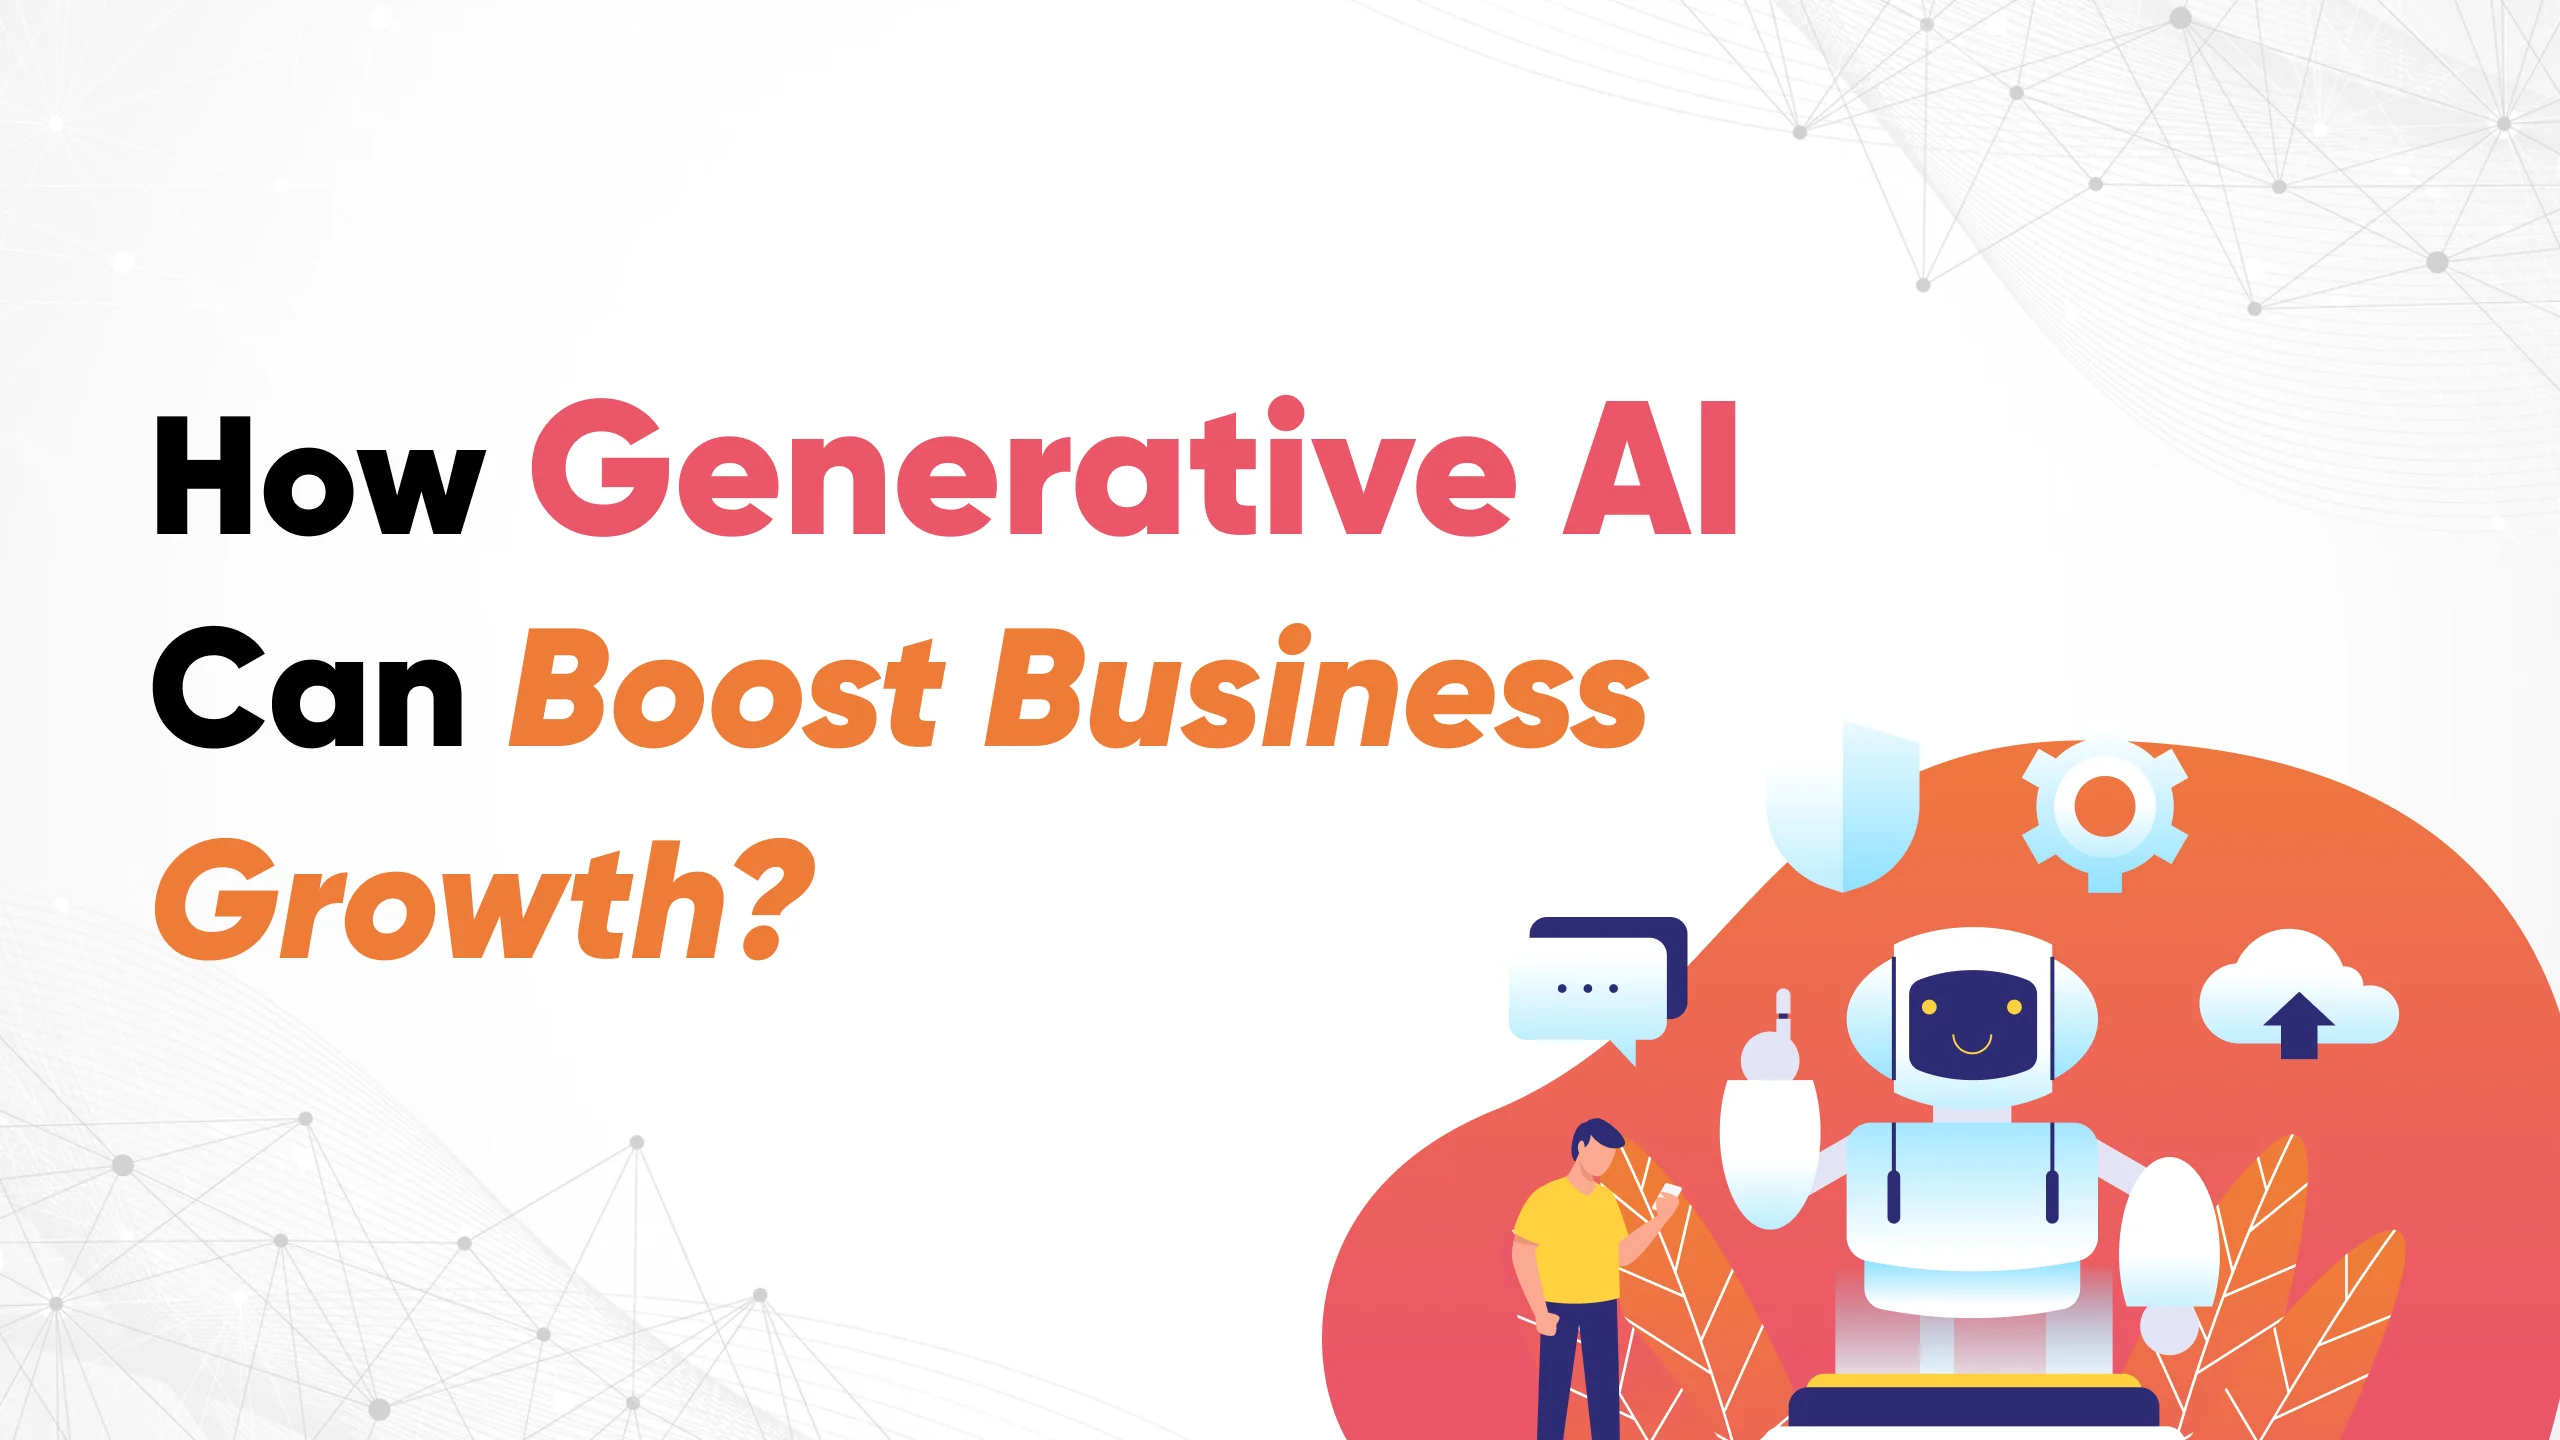 How Generative AI Can Boost Business Growth